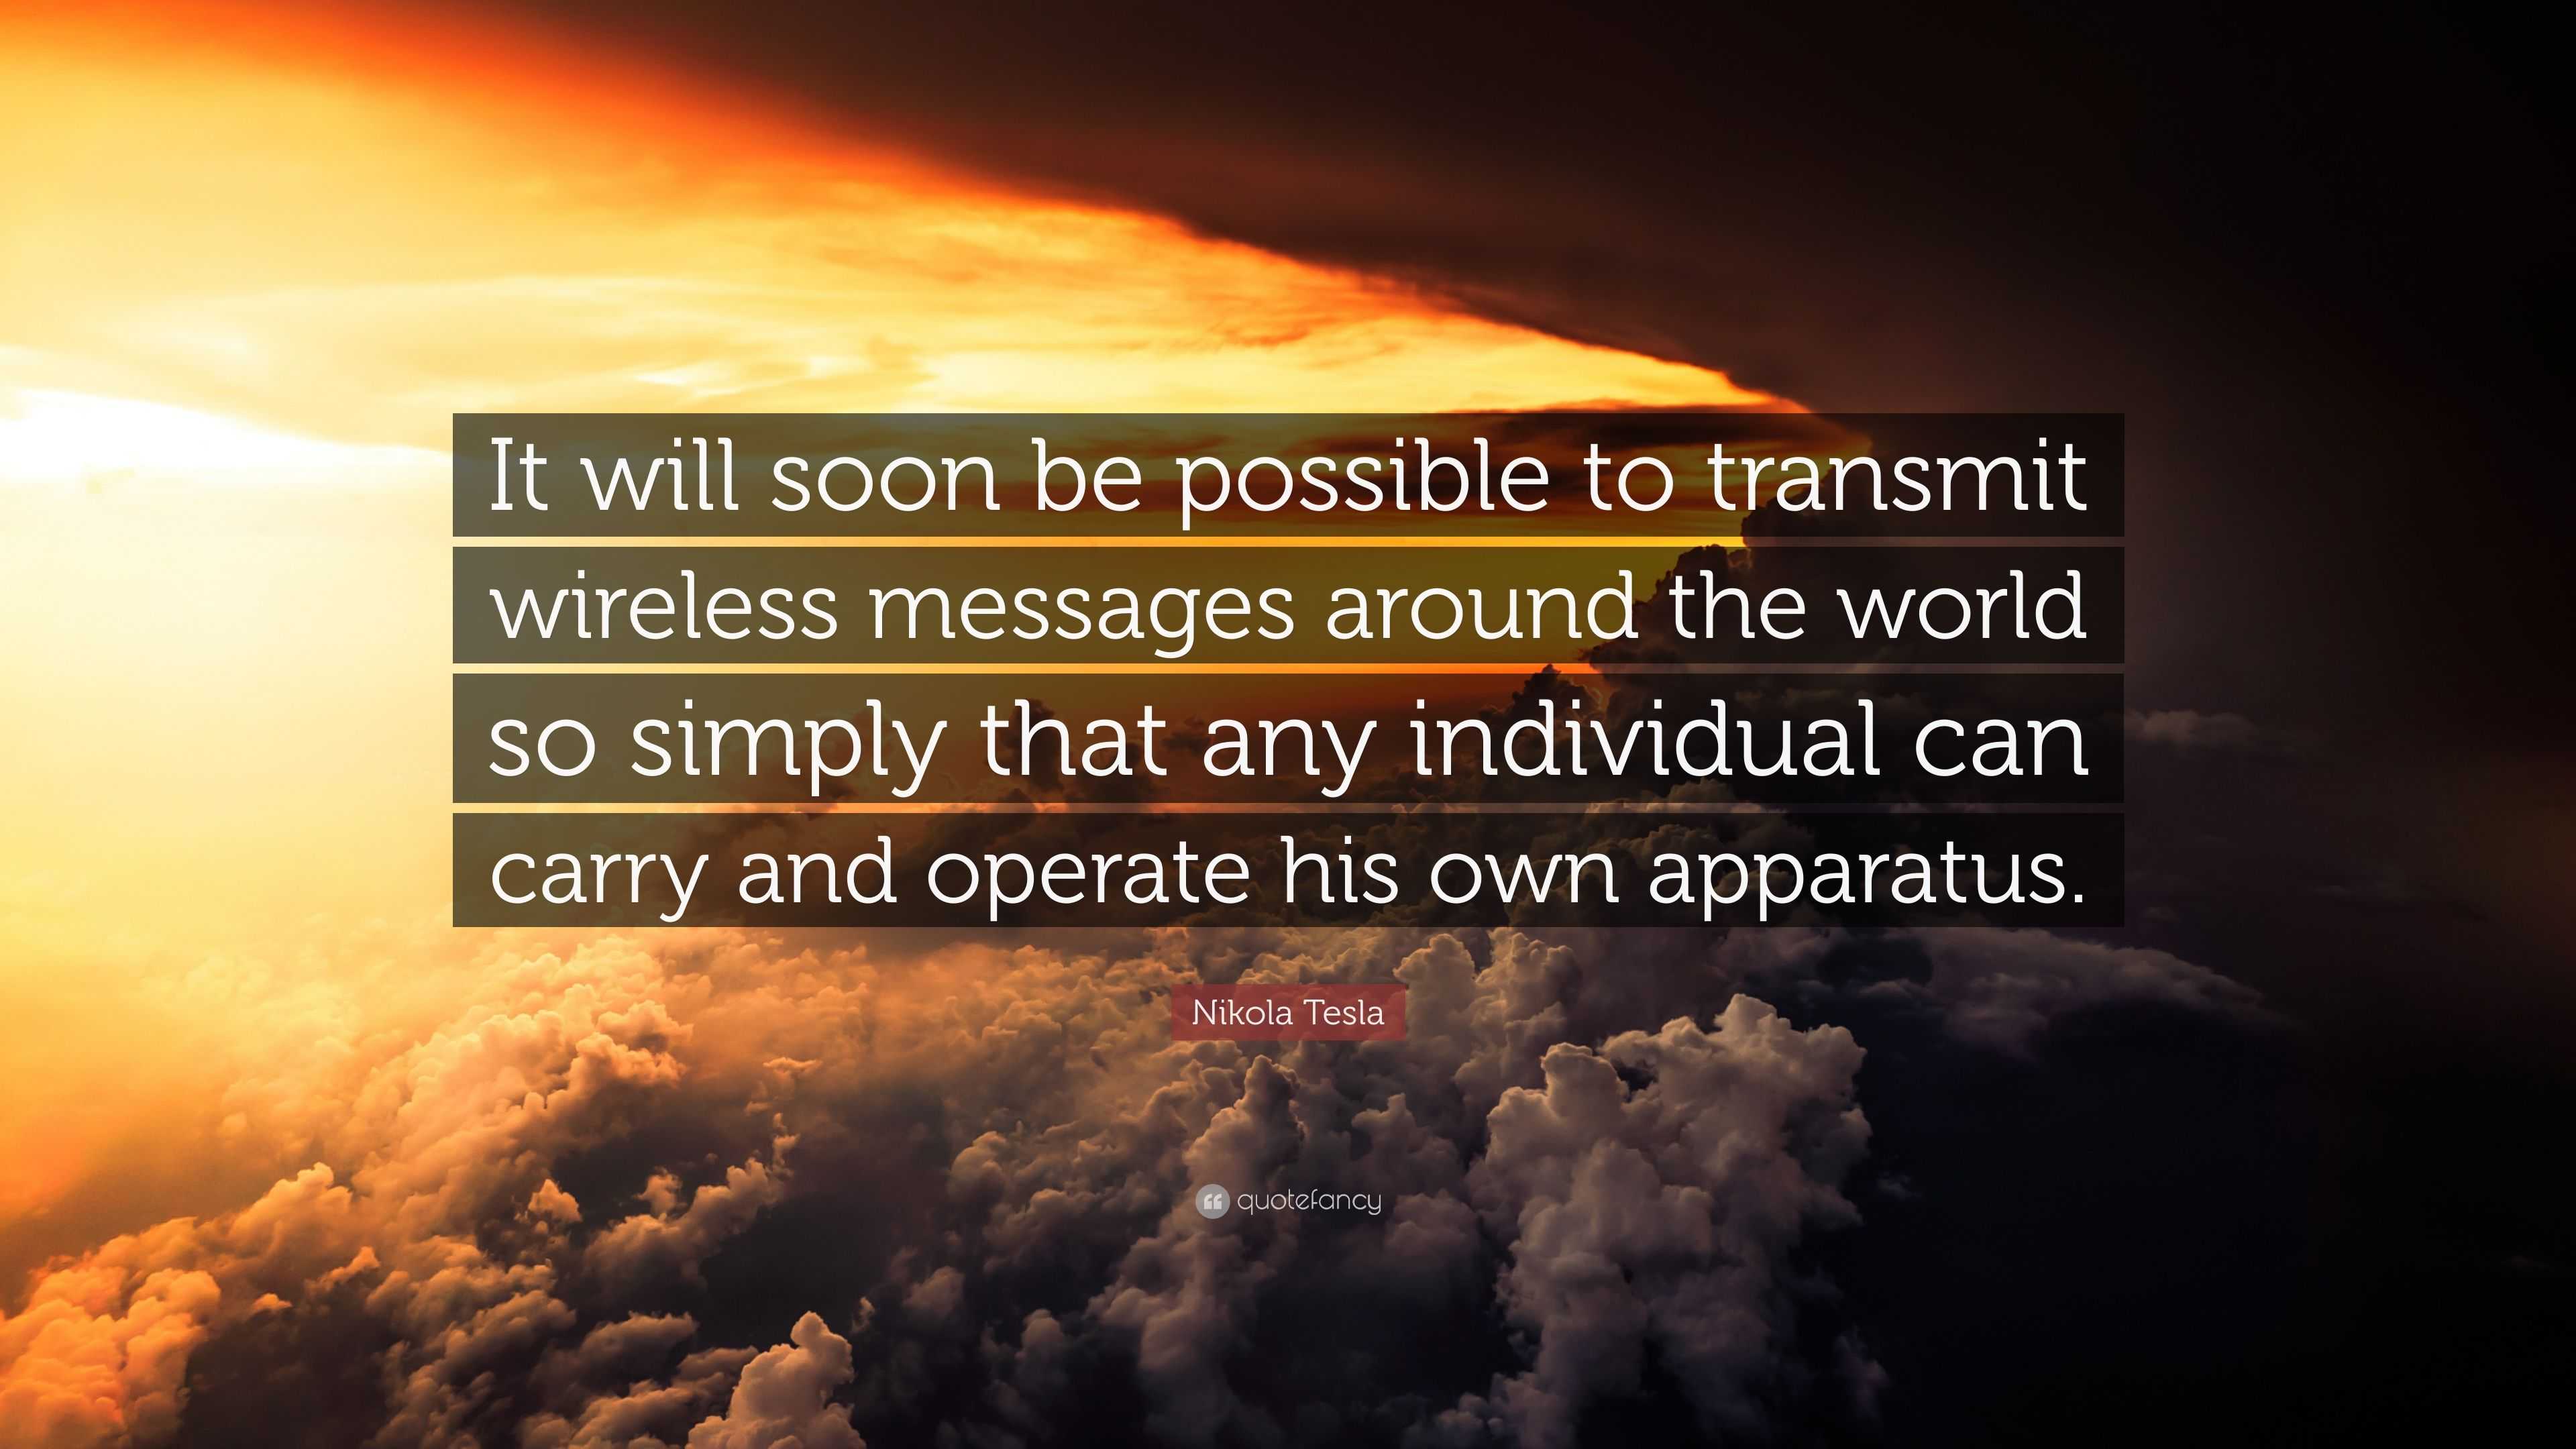 Nikola Tesla Quote: “It will soon be possible to transmit wireless messages  around the world so simply that any individual can carry and oper”